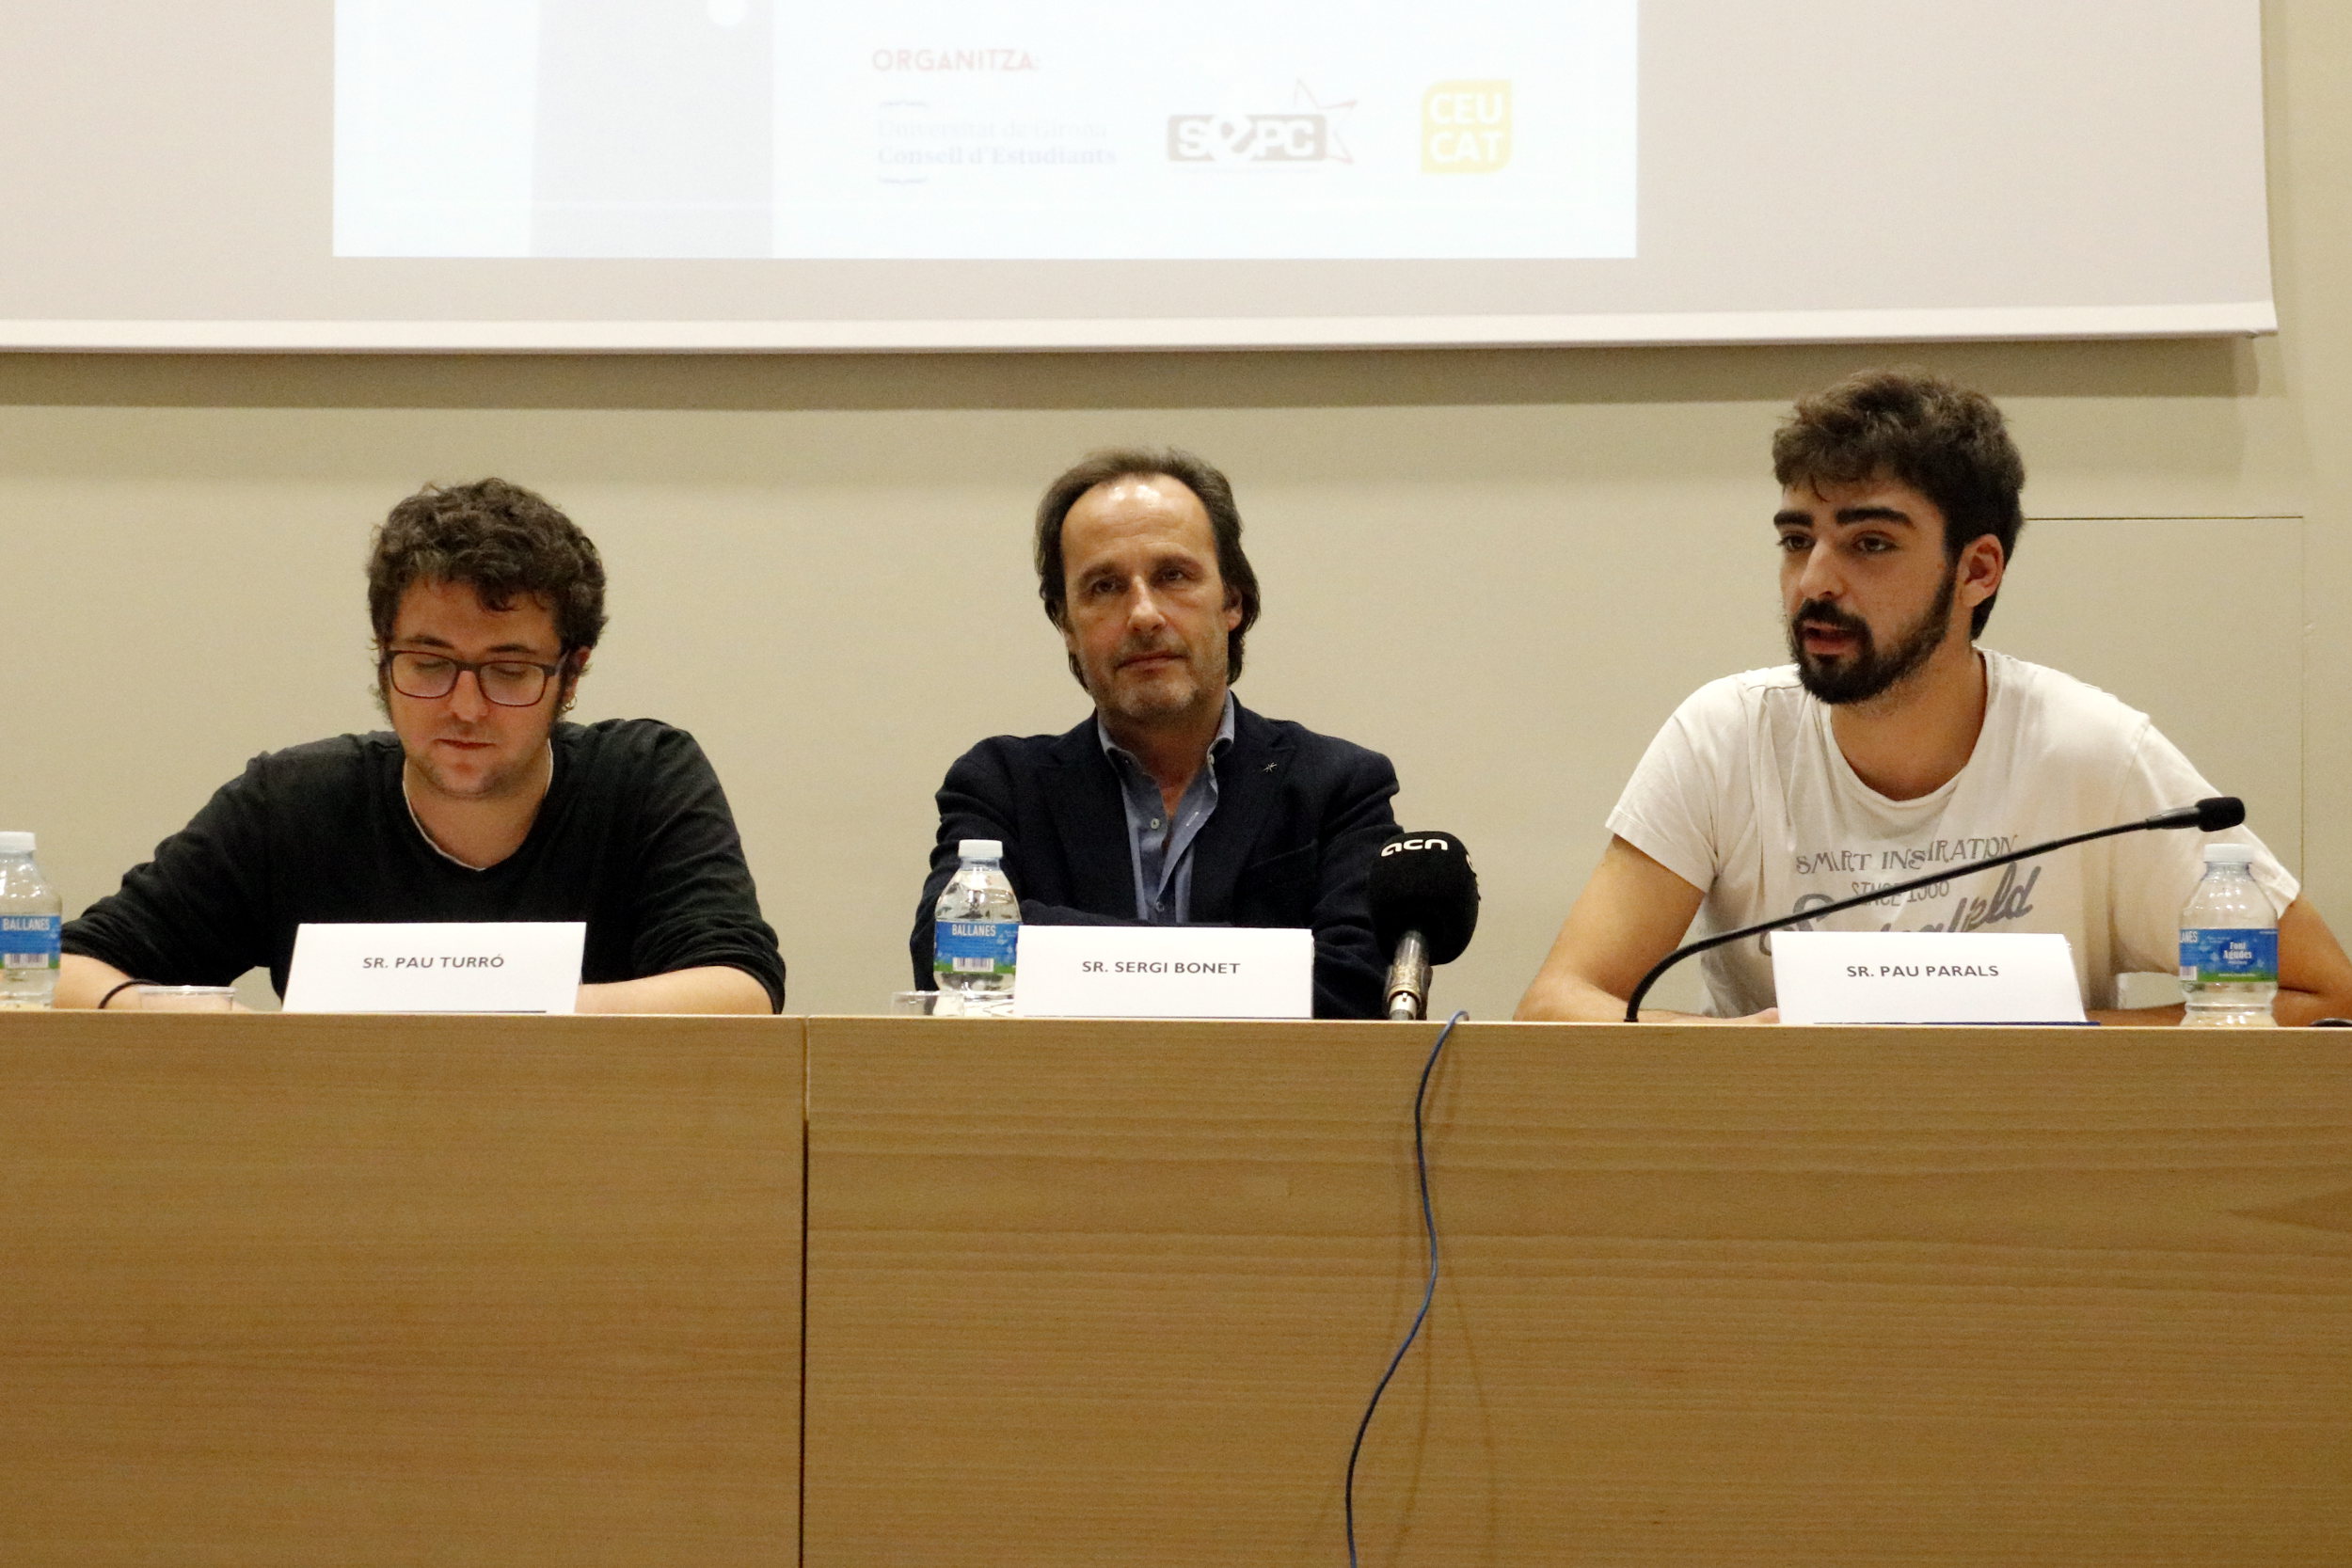 The president of ACUP, Sergi Bonet, with representatives from the SEPC and the UdG Student Council, during the 17 November press conference in 2016 (by Tania Tapia)